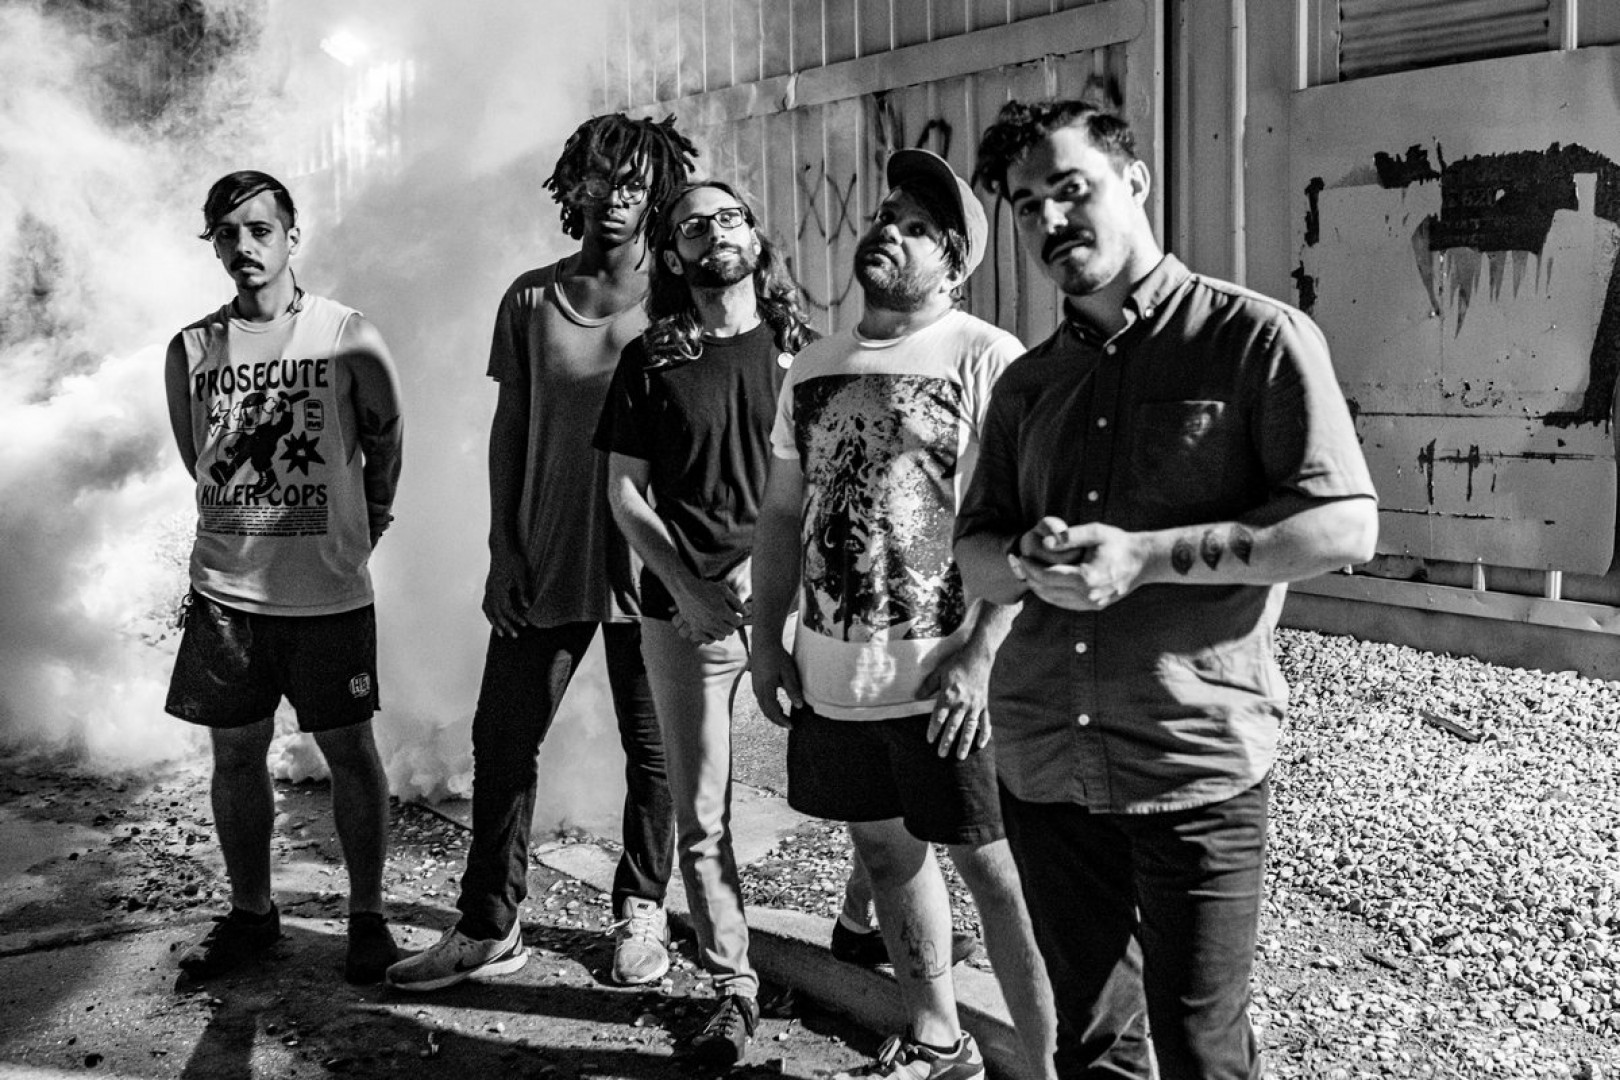 Bad Operation release "What Keeps Us Moving" video